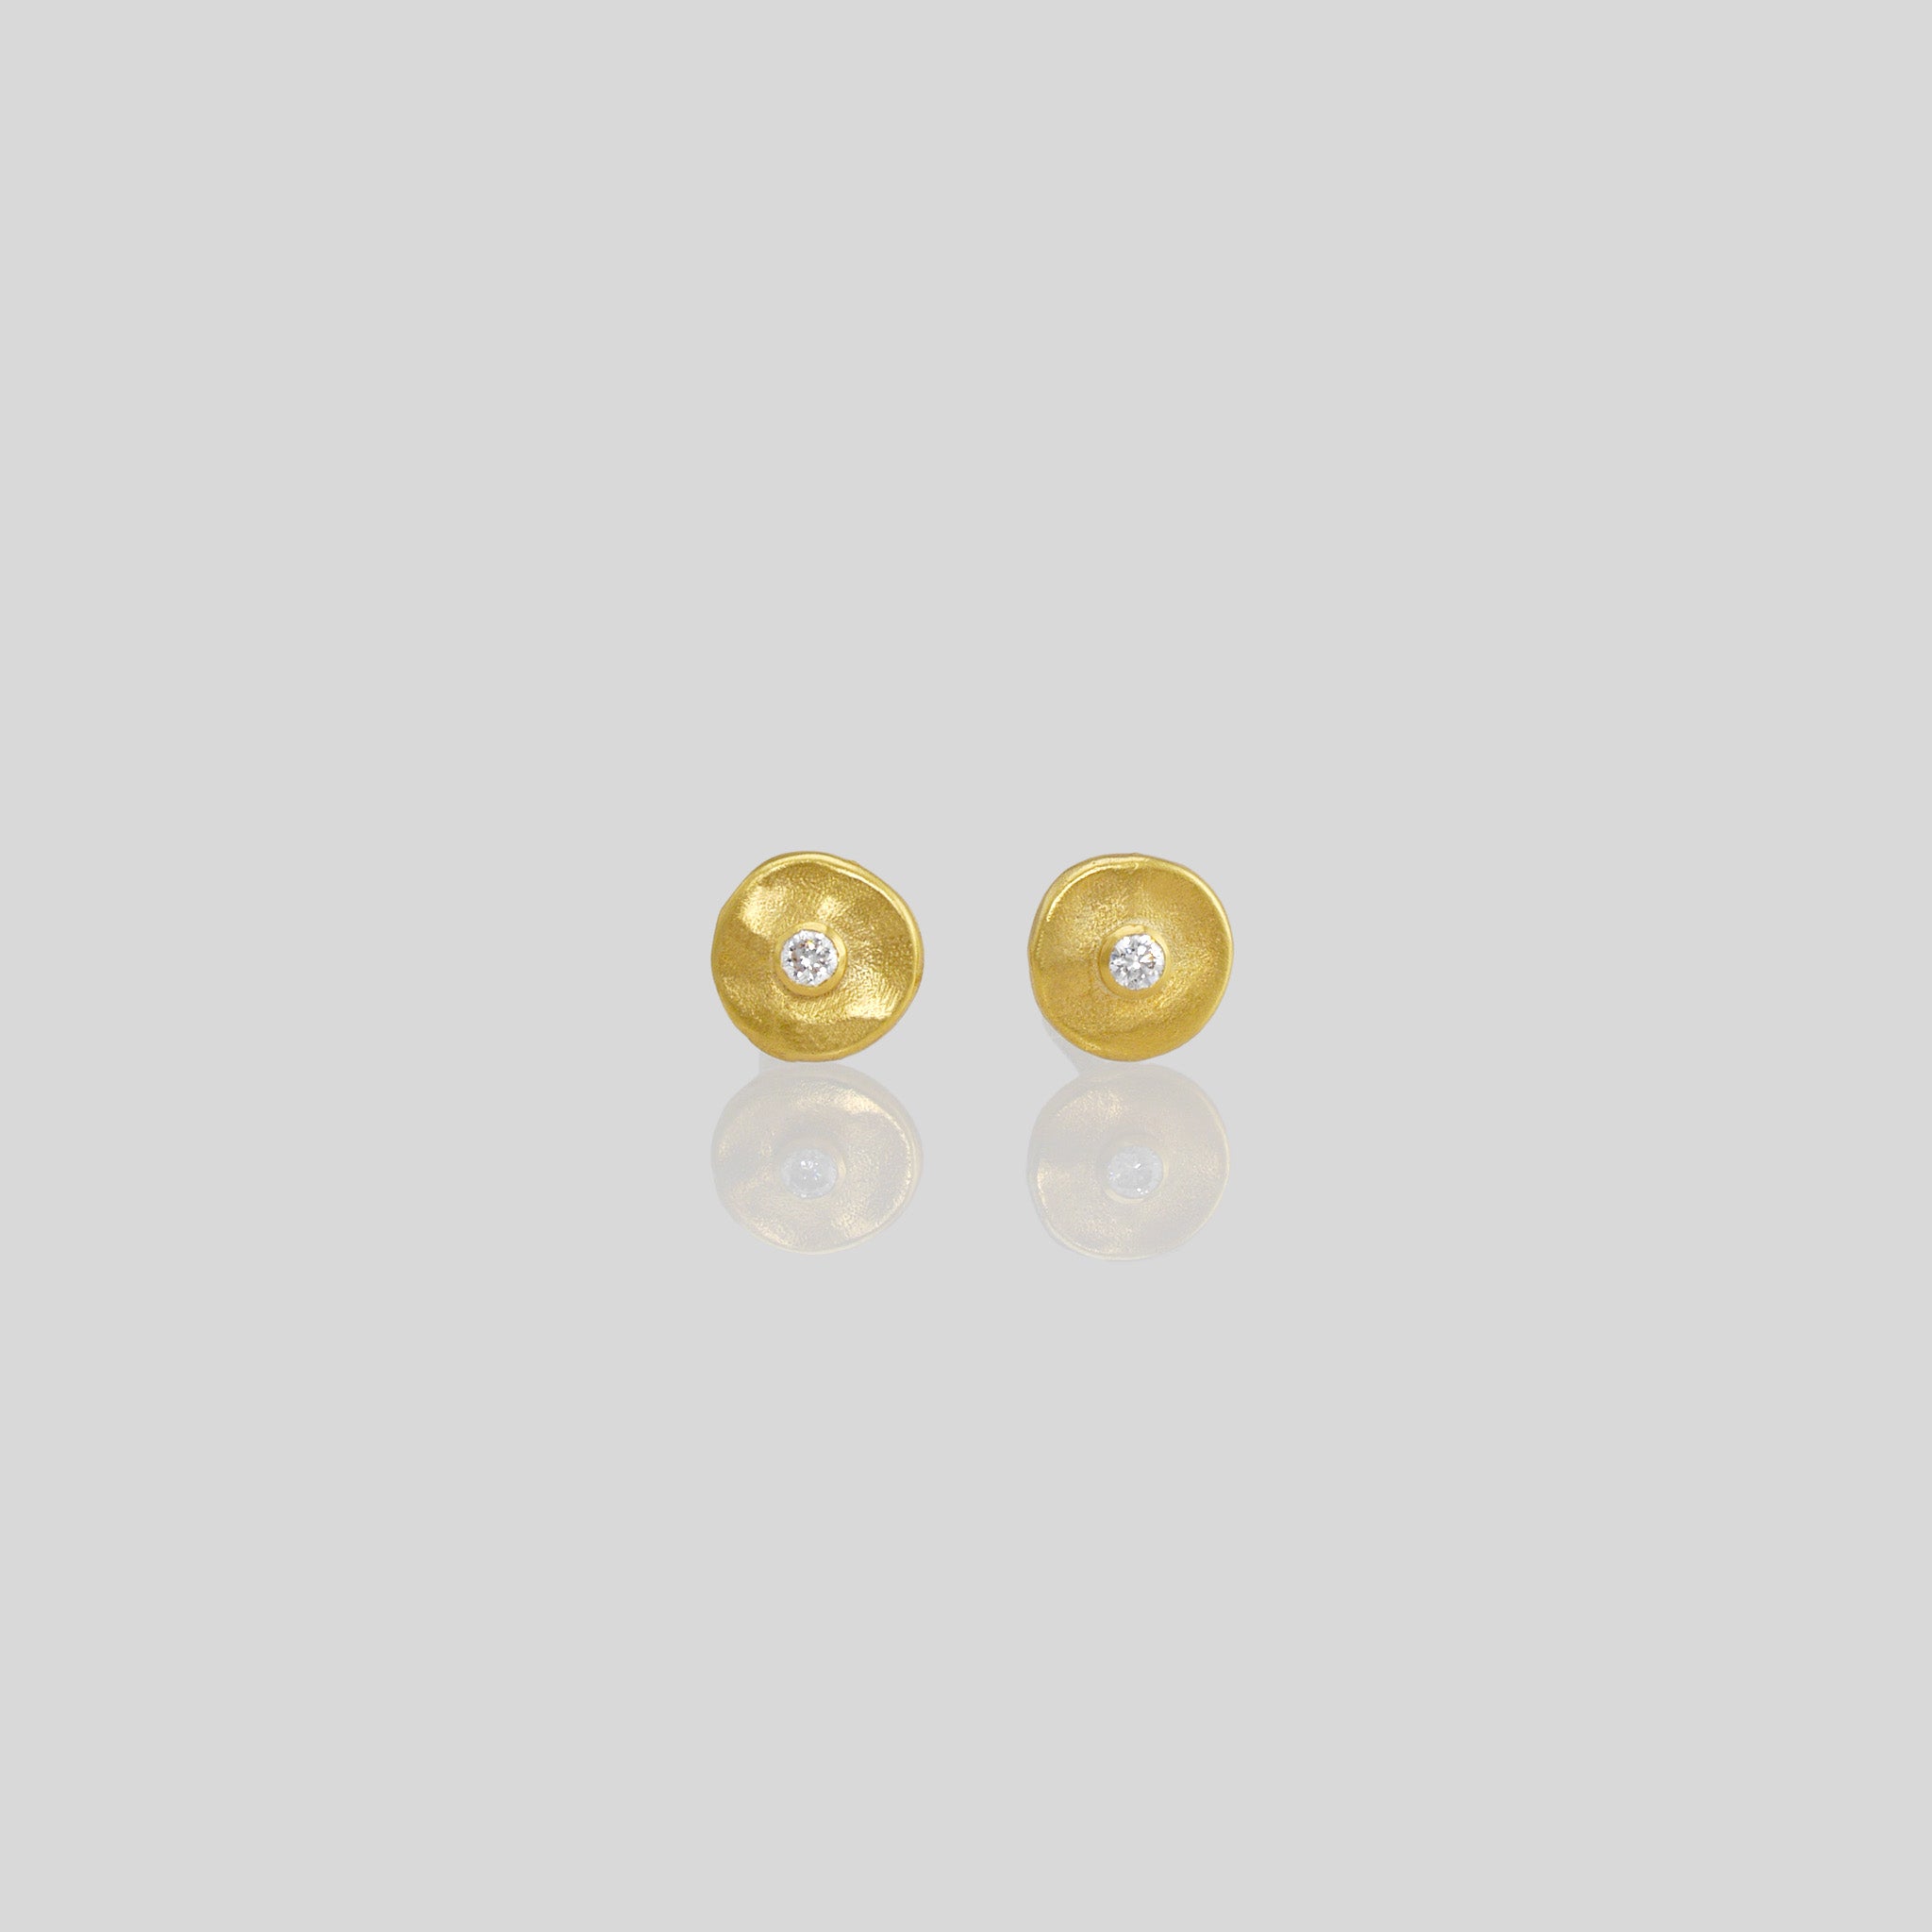 Hand-crafted gold stud earrings with a round amorphous shape, featuring a diamond set in the center.